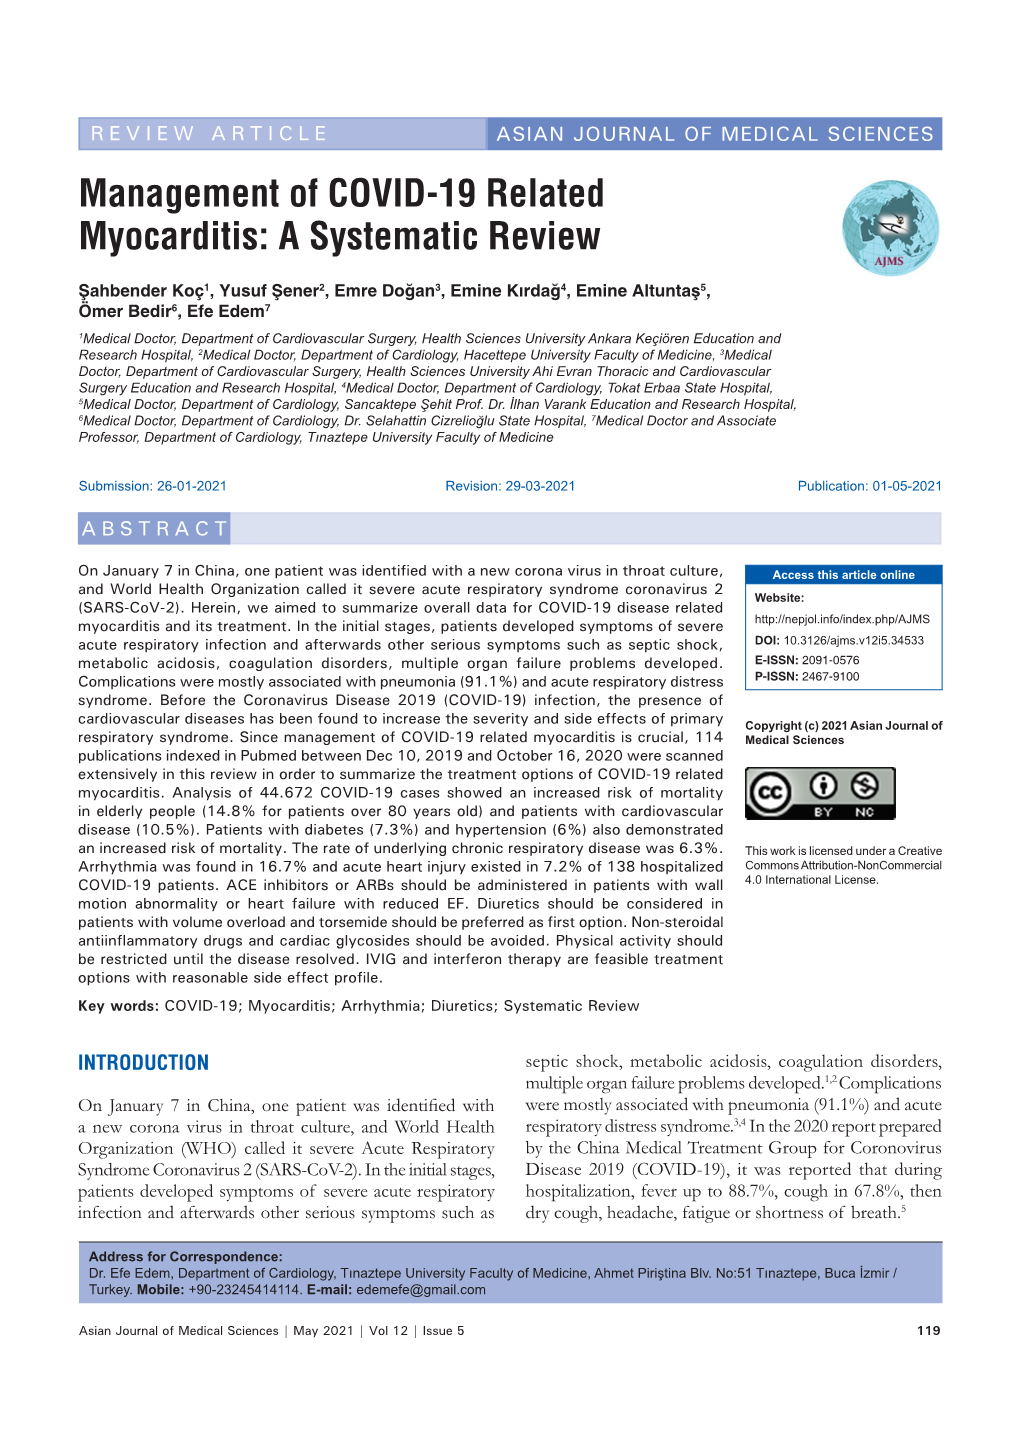 Management of COVID-19 Related Myocarditis: a Systematic Review